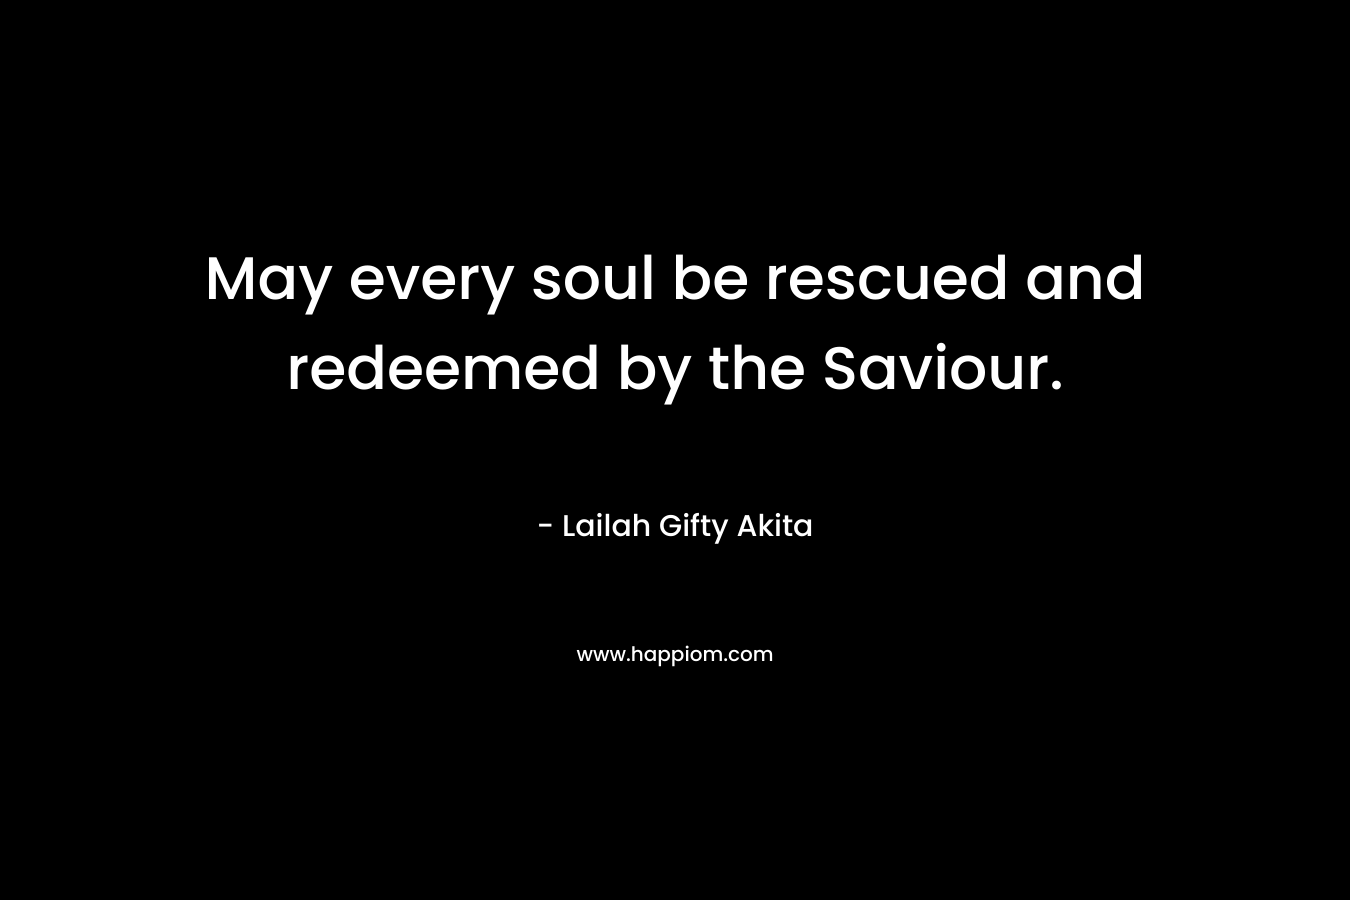 May every soul be rescued and redeemed by the Saviour. – Lailah Gifty Akita